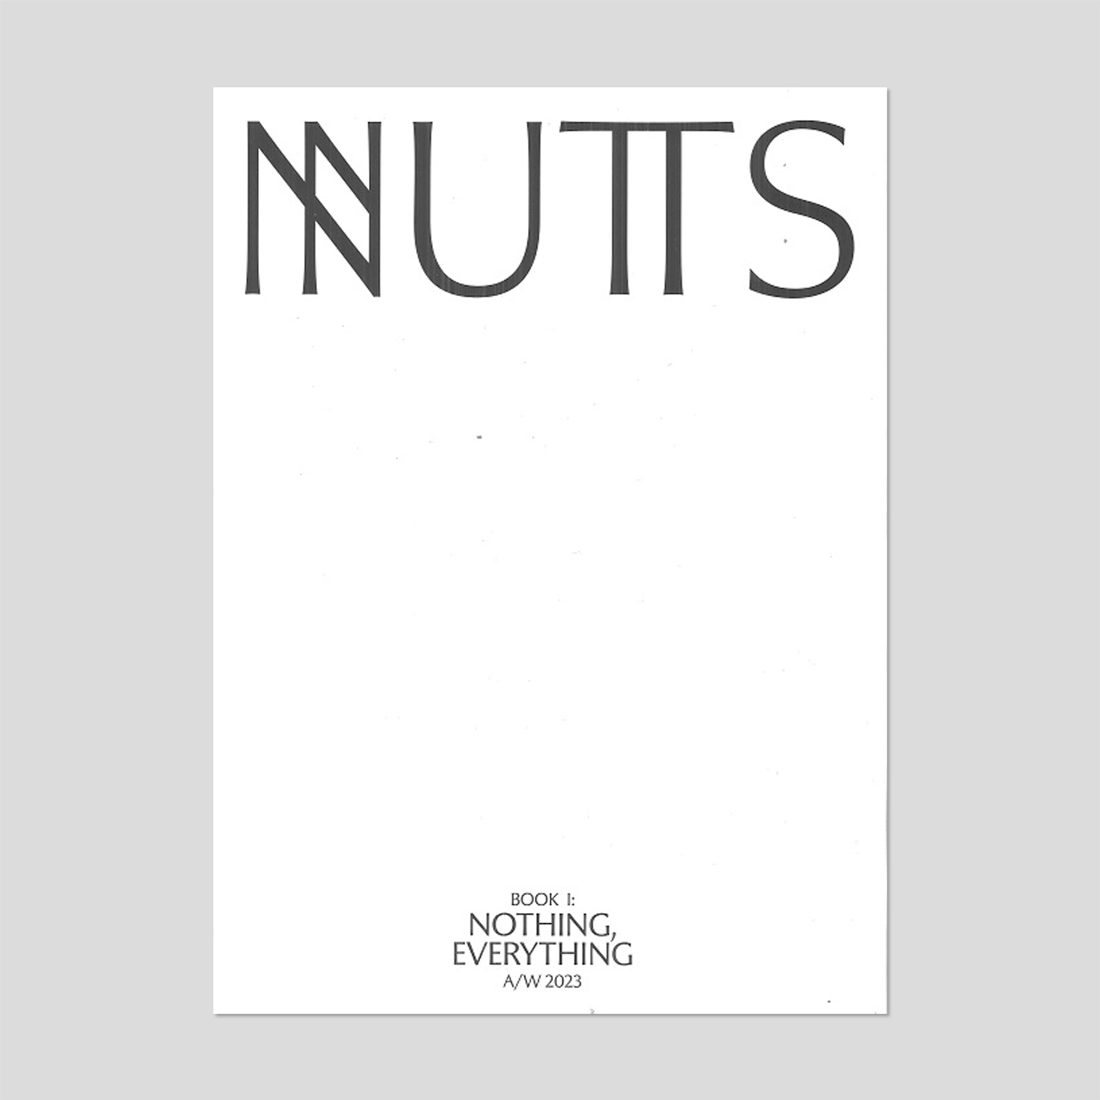 NUTS #1 Nothing, Everything